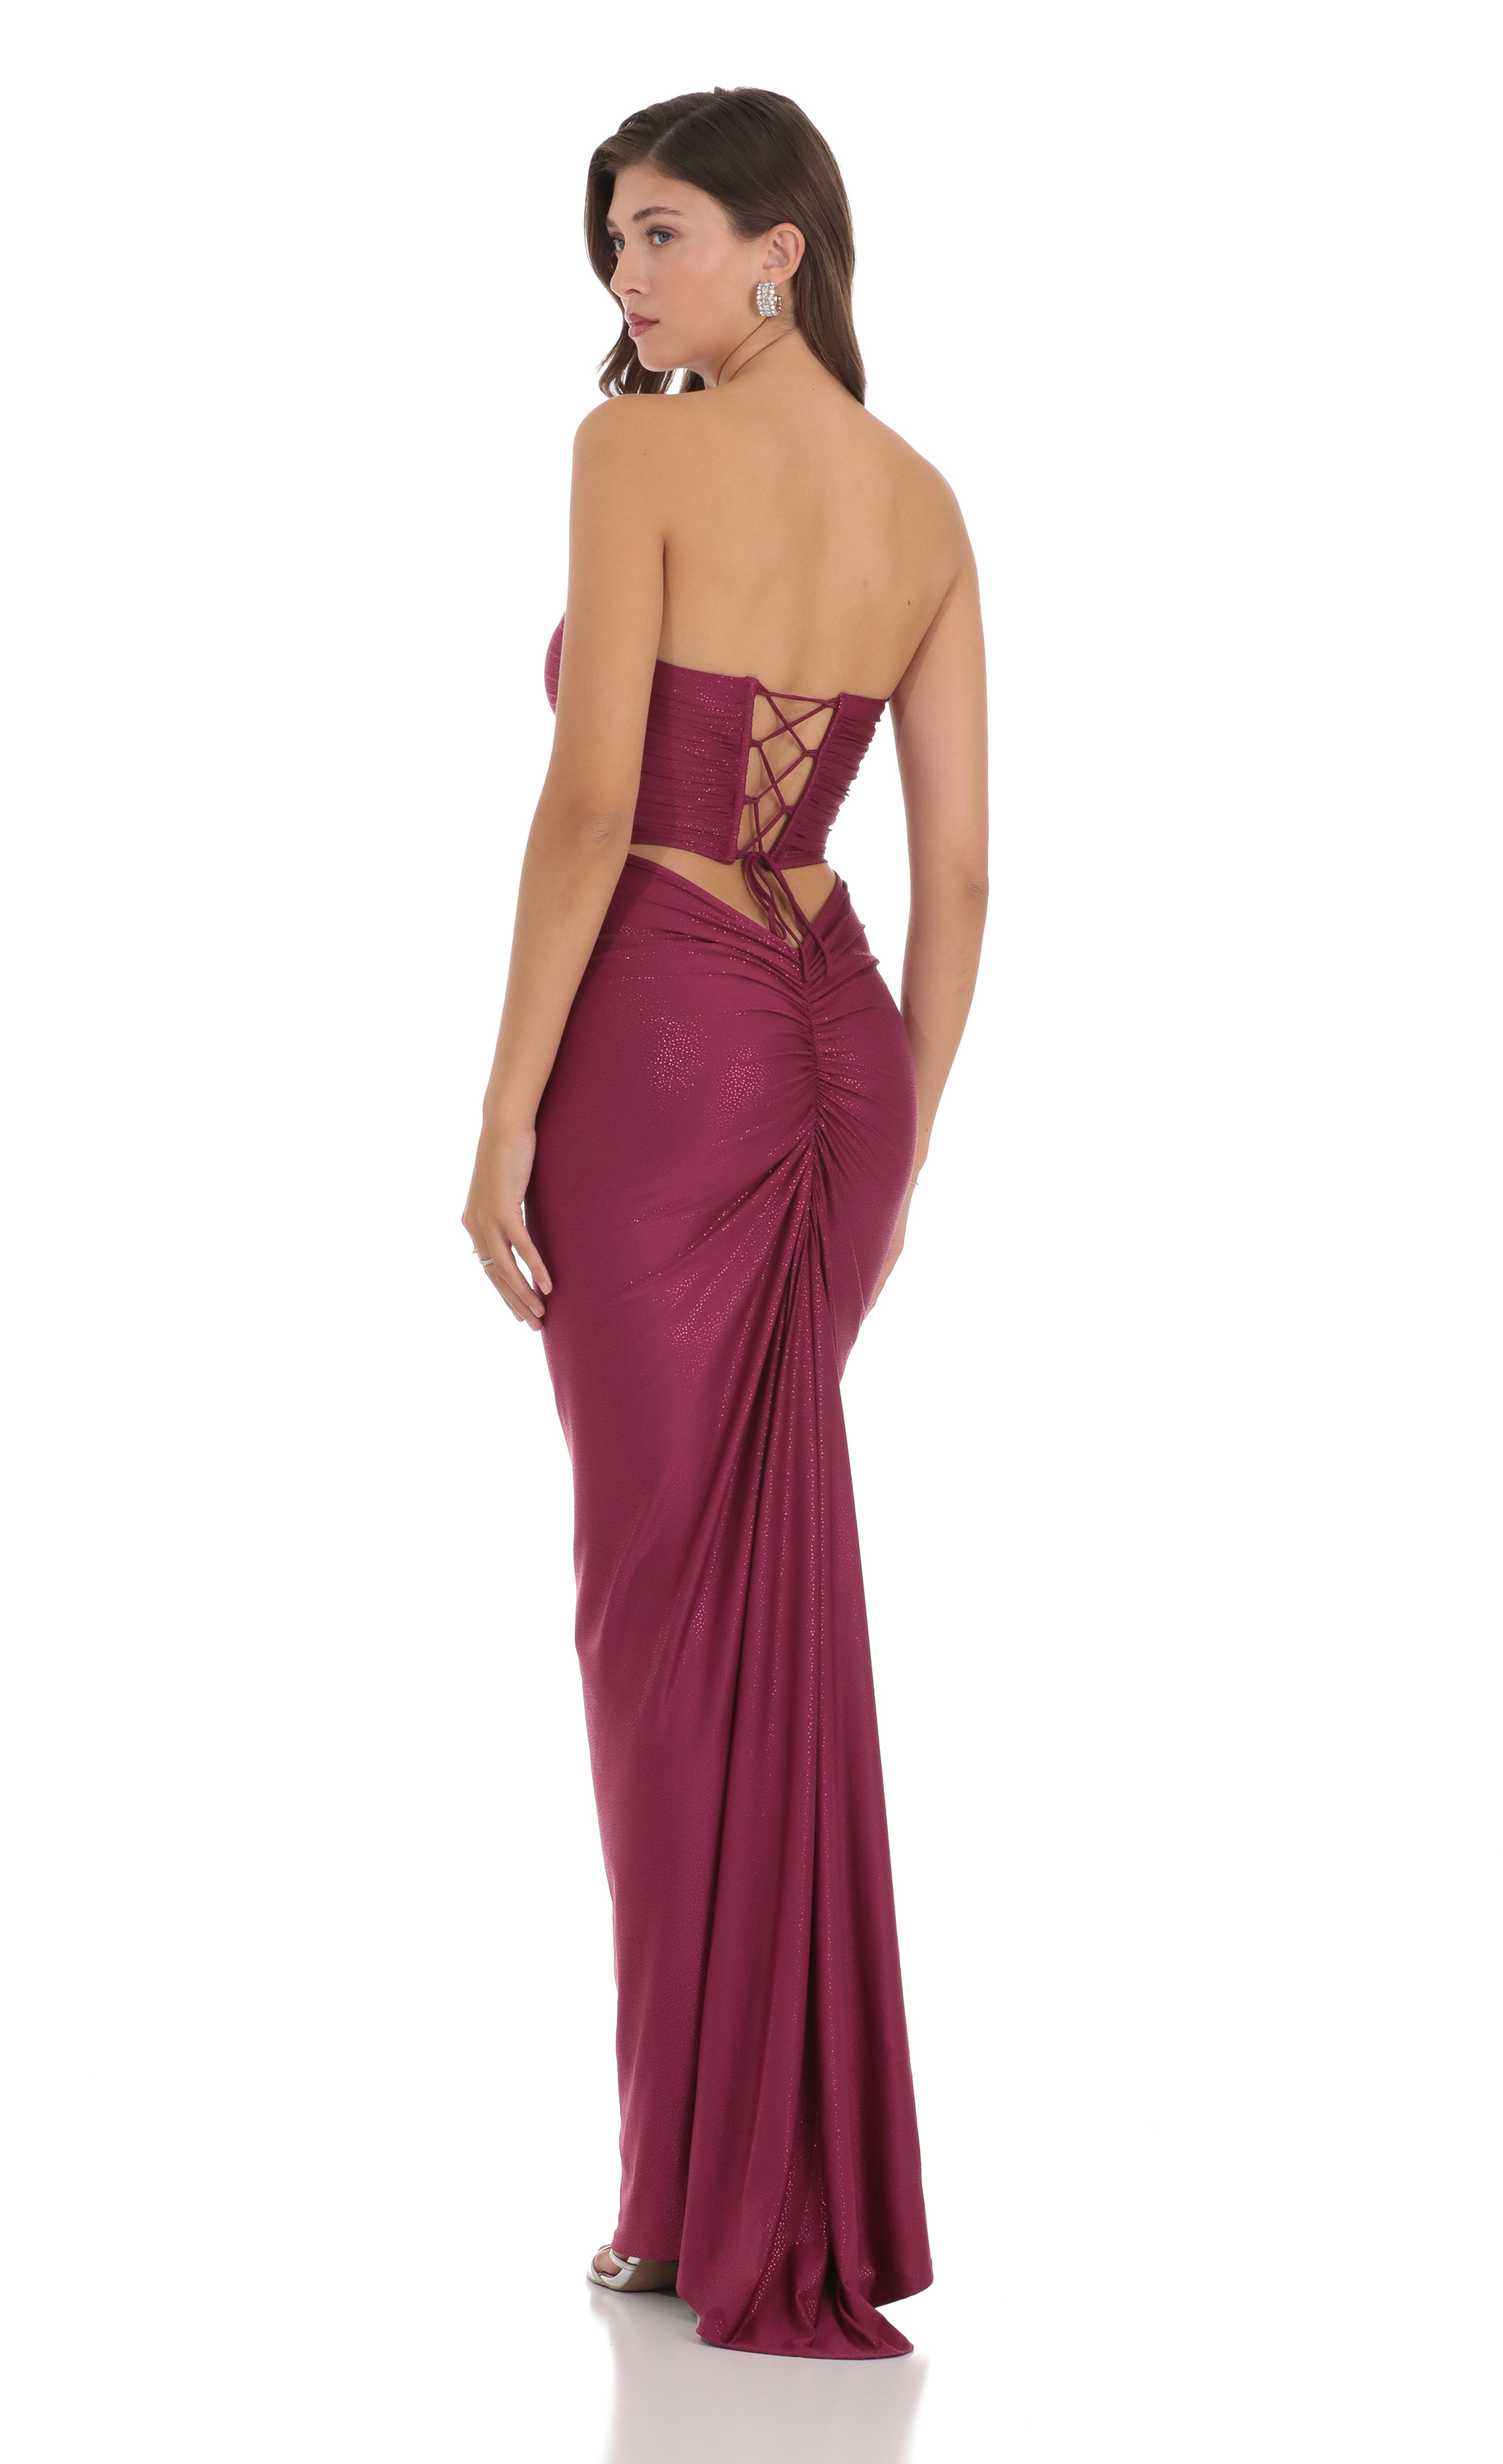 Shimmer Strapless Corset Dress in Berry